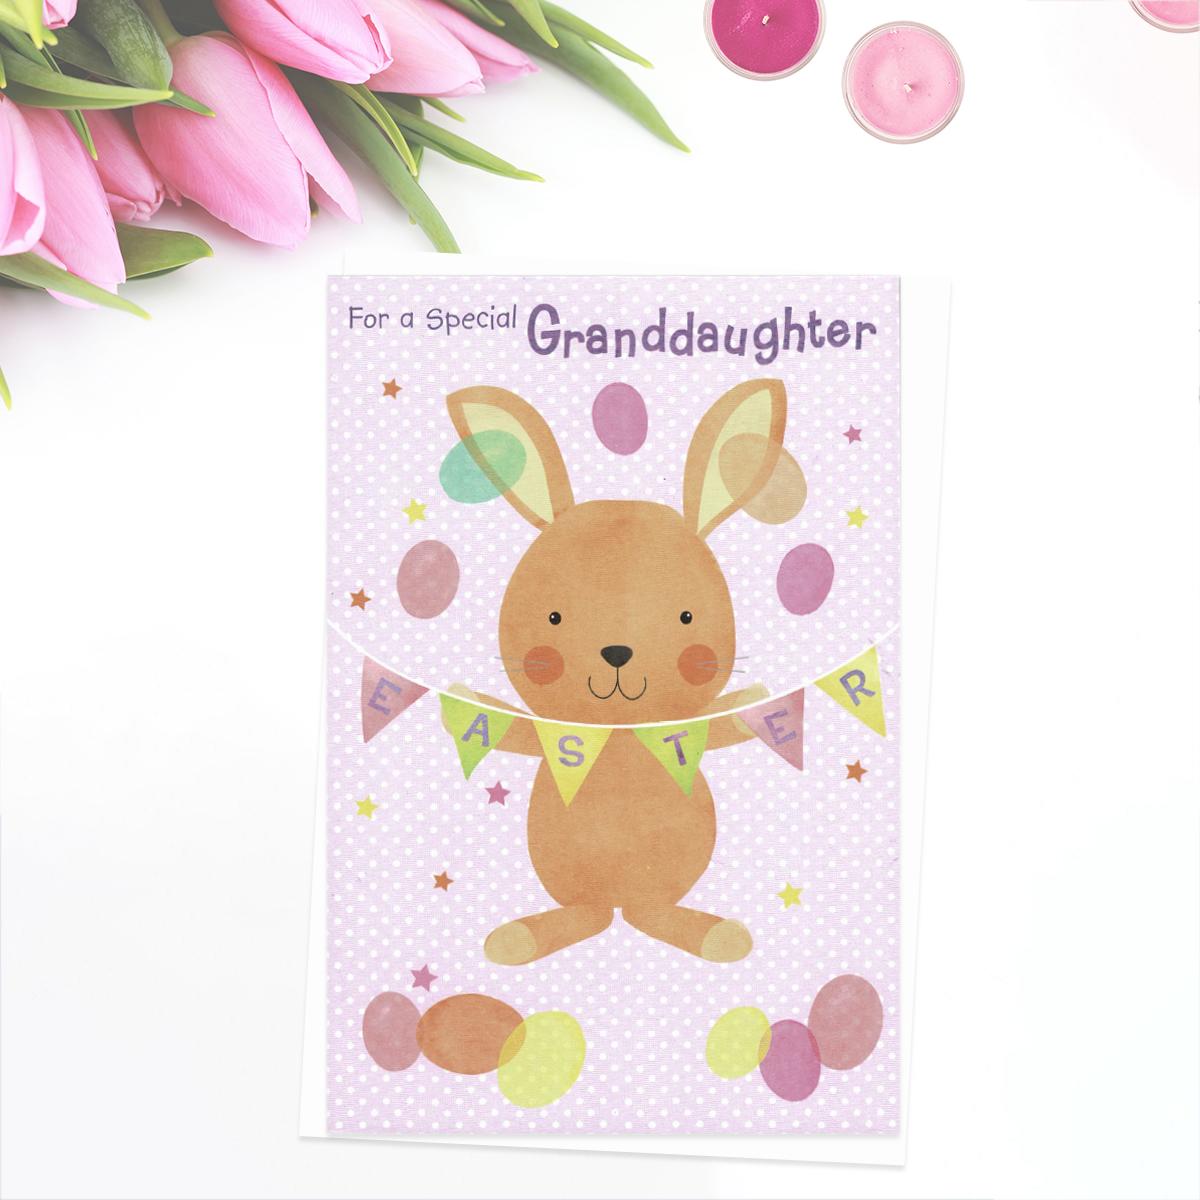 ' For A Special Granddaughter' Easter card showing Cute Rabbit with bunting and eggs. Complete with yellow envelope